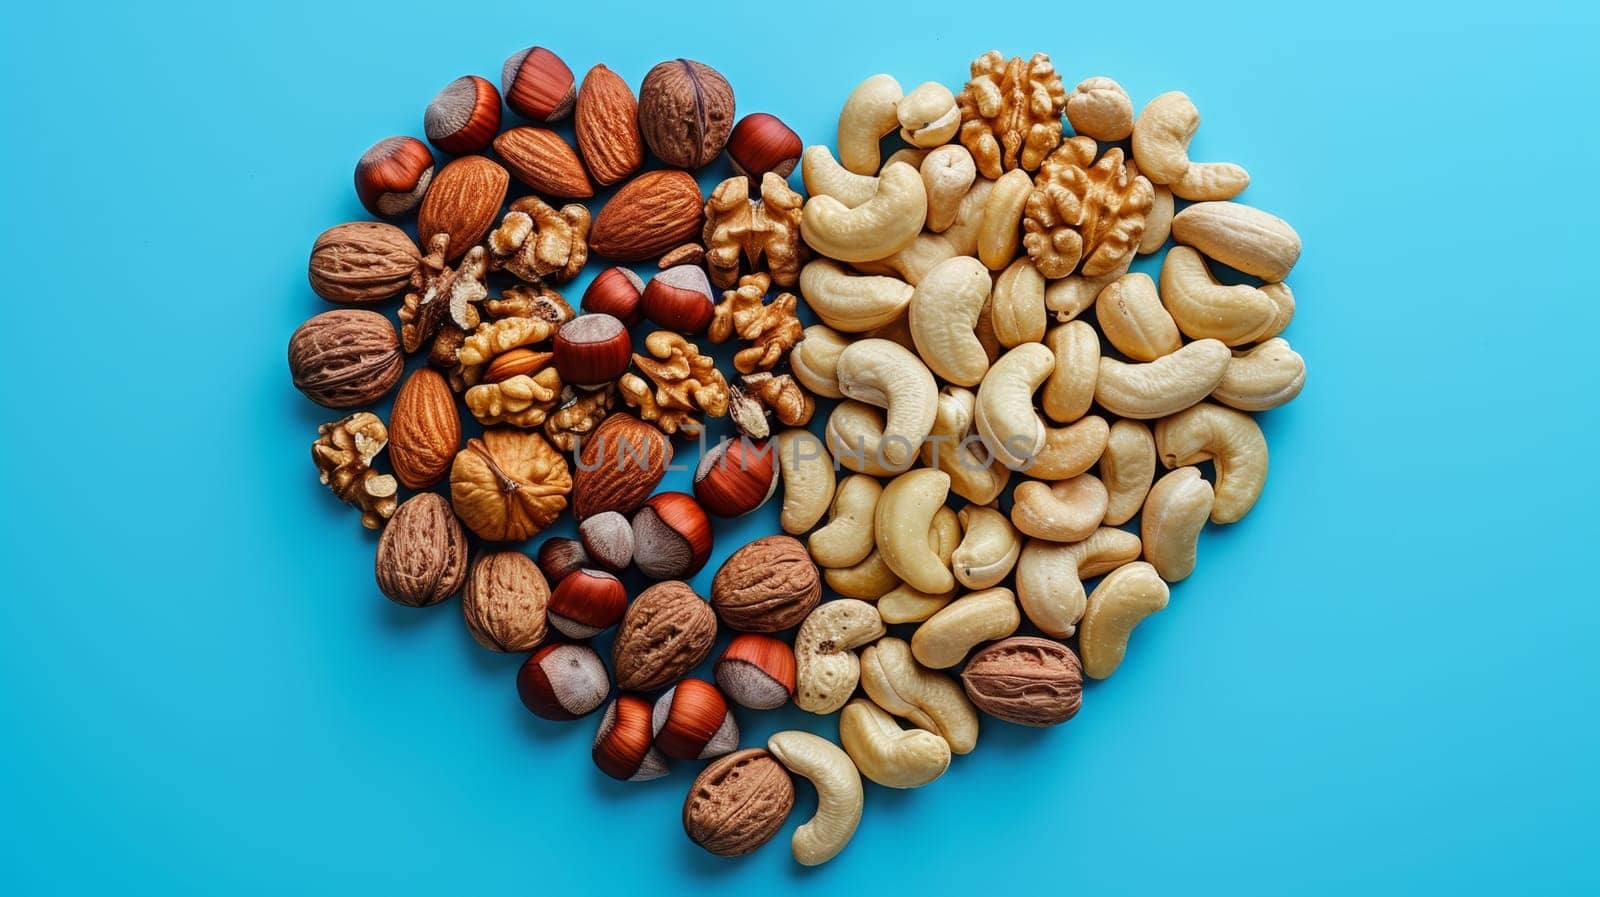 A heart shaped nut and fruit selection on blue background